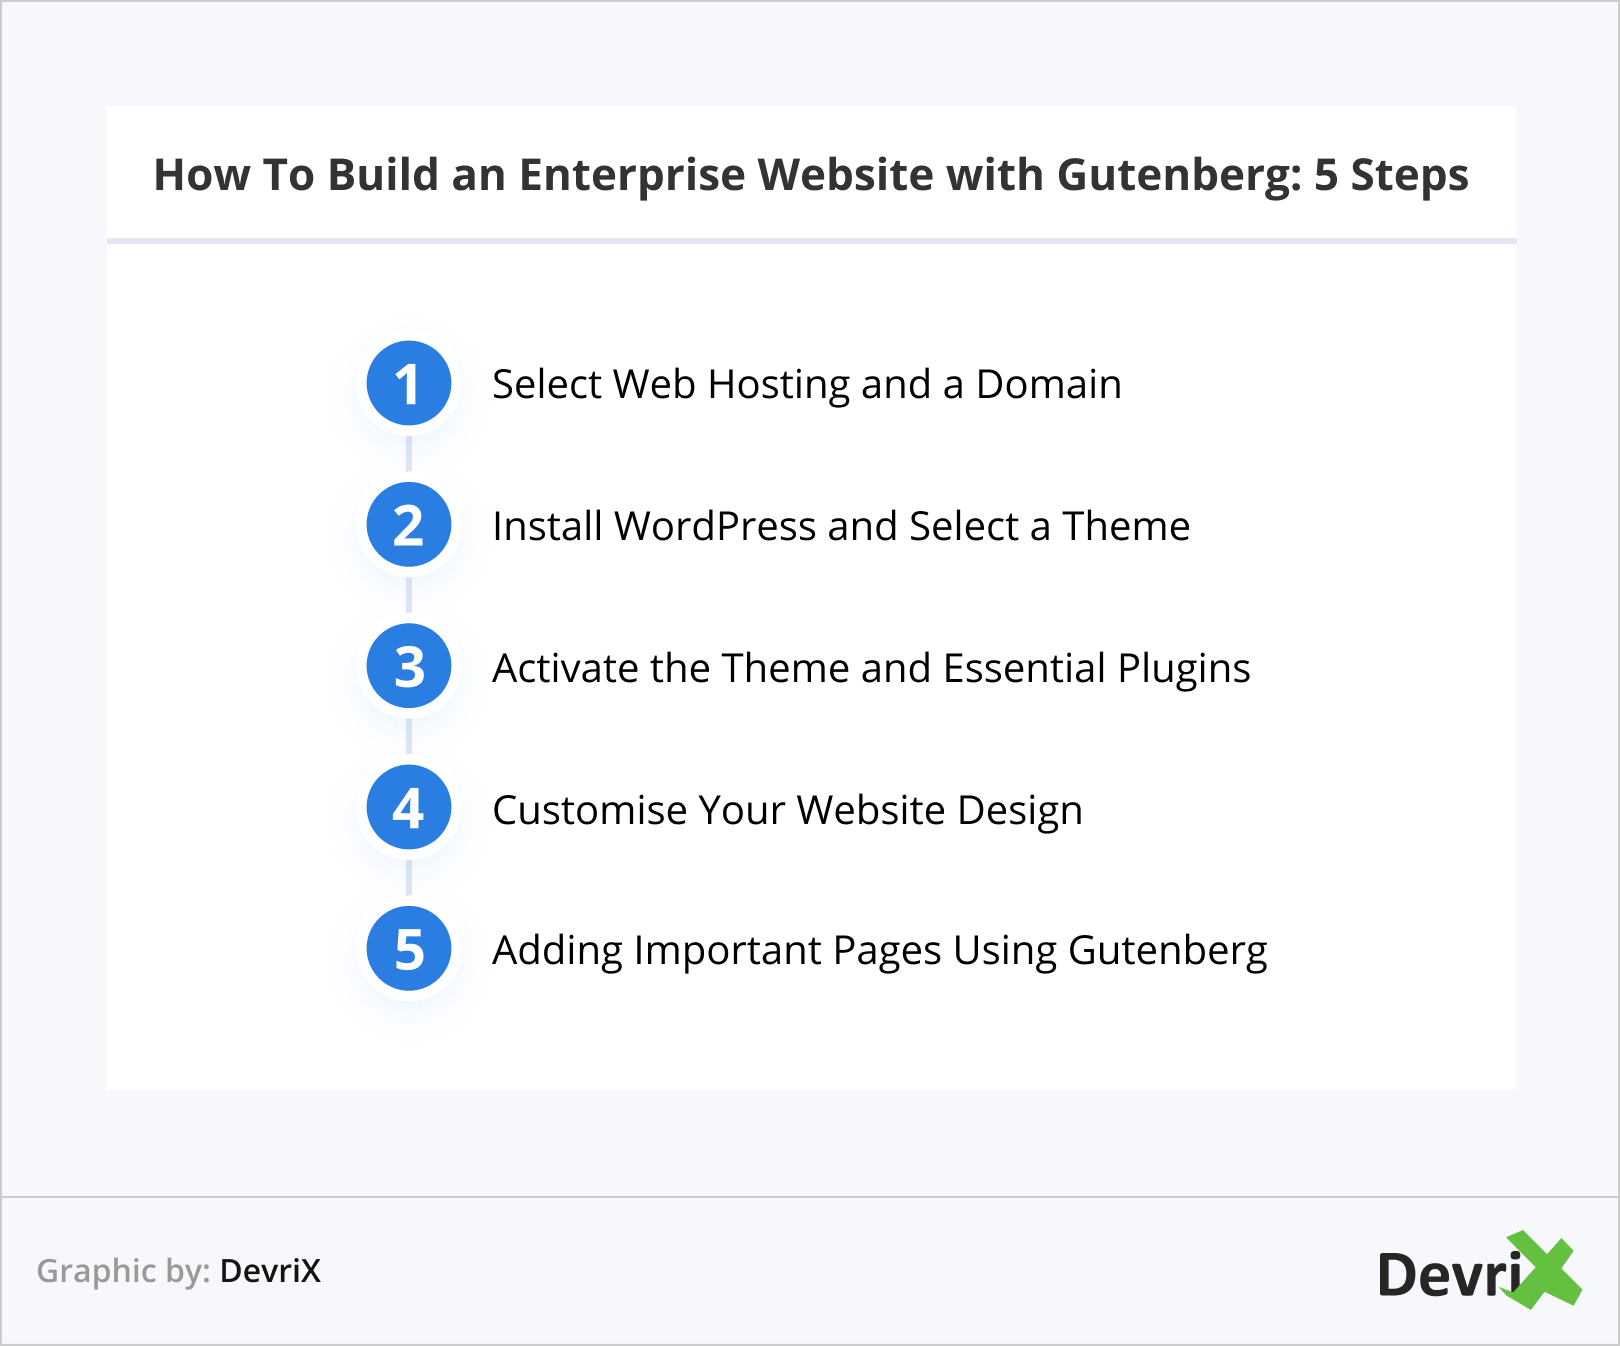 How To Build an Enterprise Website with Gutenberg_ 5 Steps